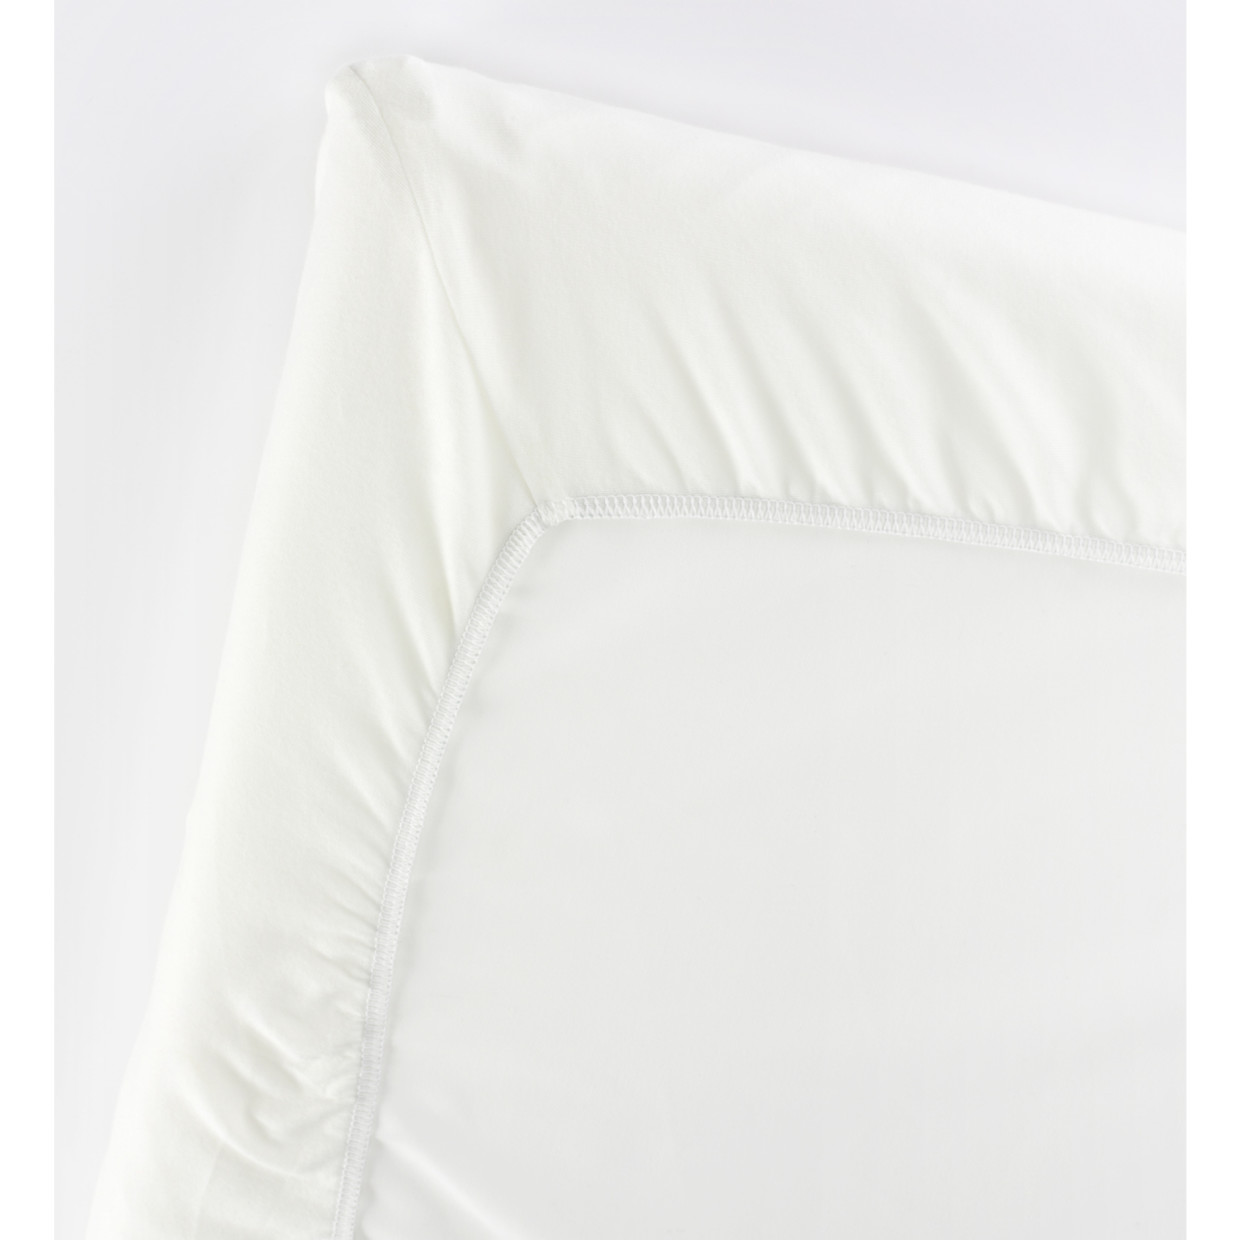 Babybjörn Organic Fitted Sheet for Travel Crib Light - Natural White.